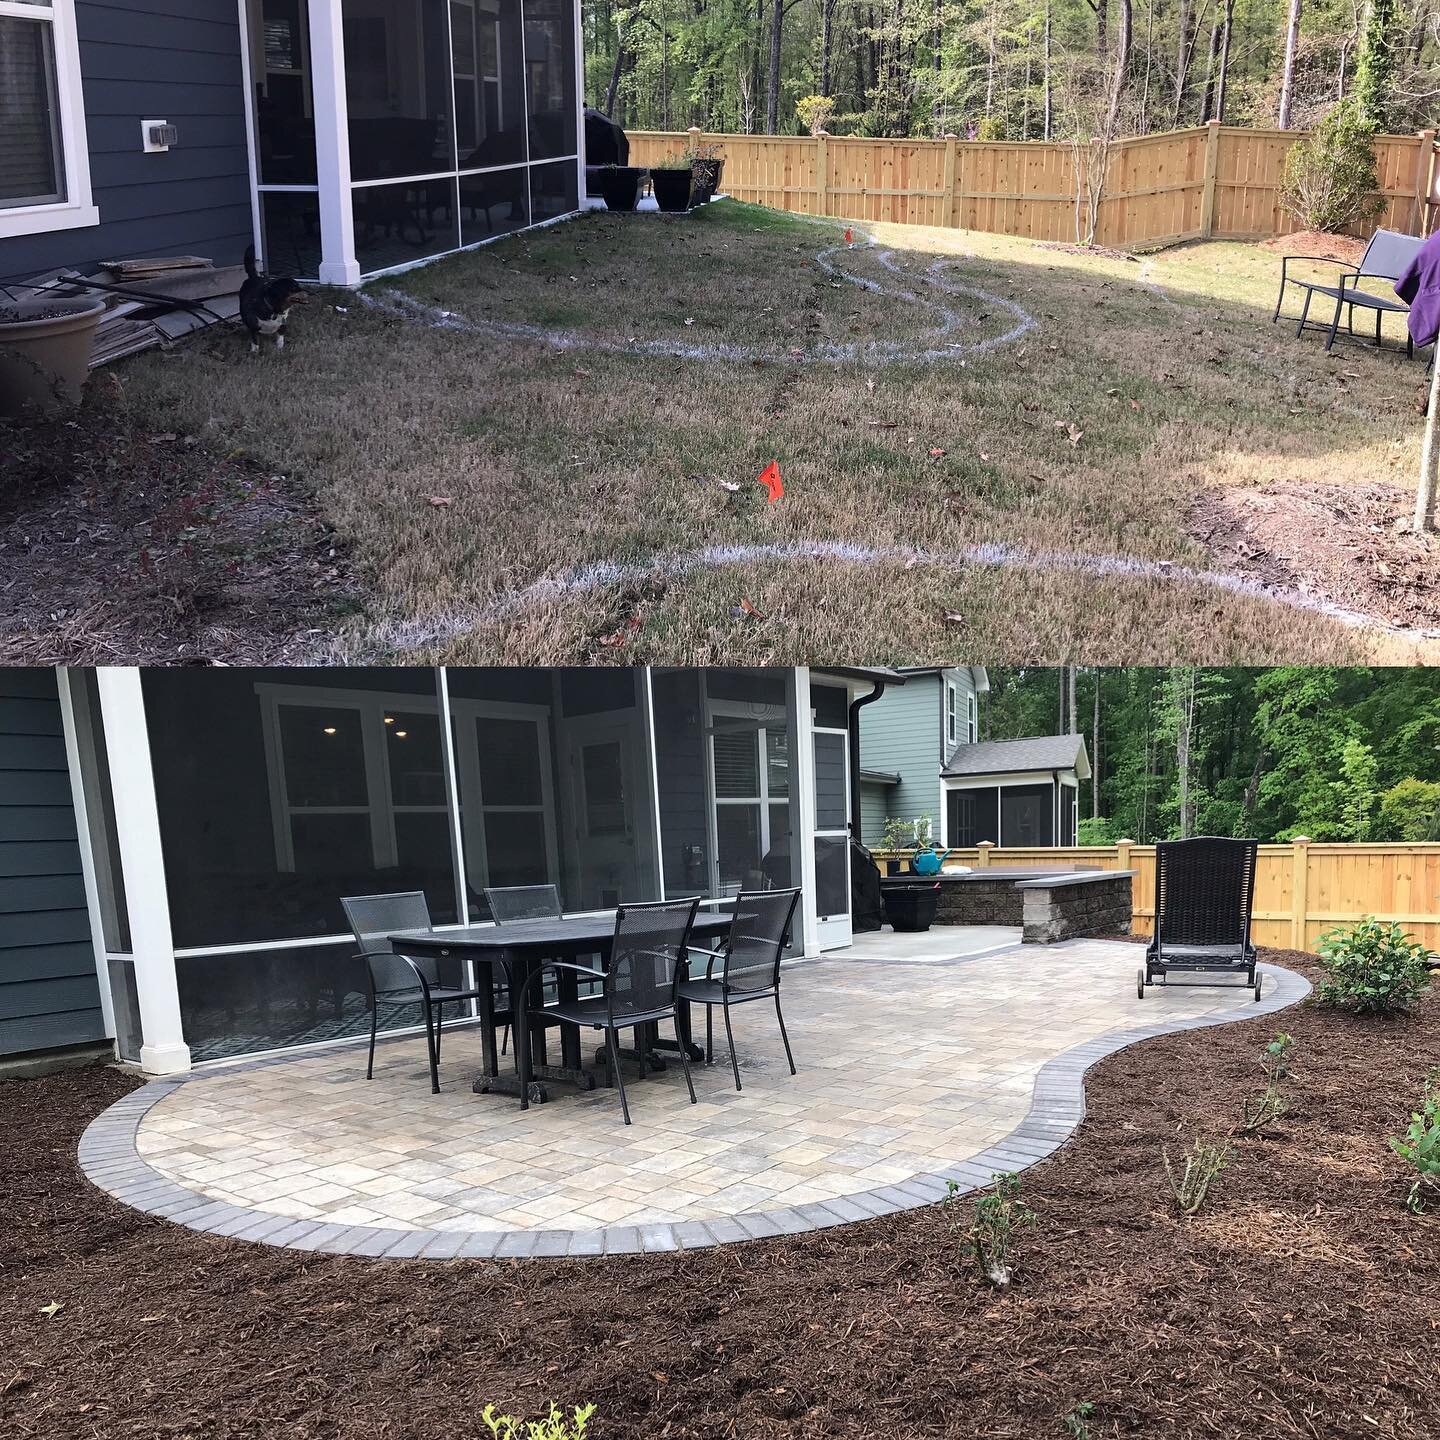 Before &amp; After of a recently completed project in the Canterbury subdivision in Durham, NC.  #terrascapesnc #retainingwalls #retainingwalldesign #unitpaving #landscapeconstruction #contractorsofinsta #landscape #belgard #rockwoodwalls #hardscapes